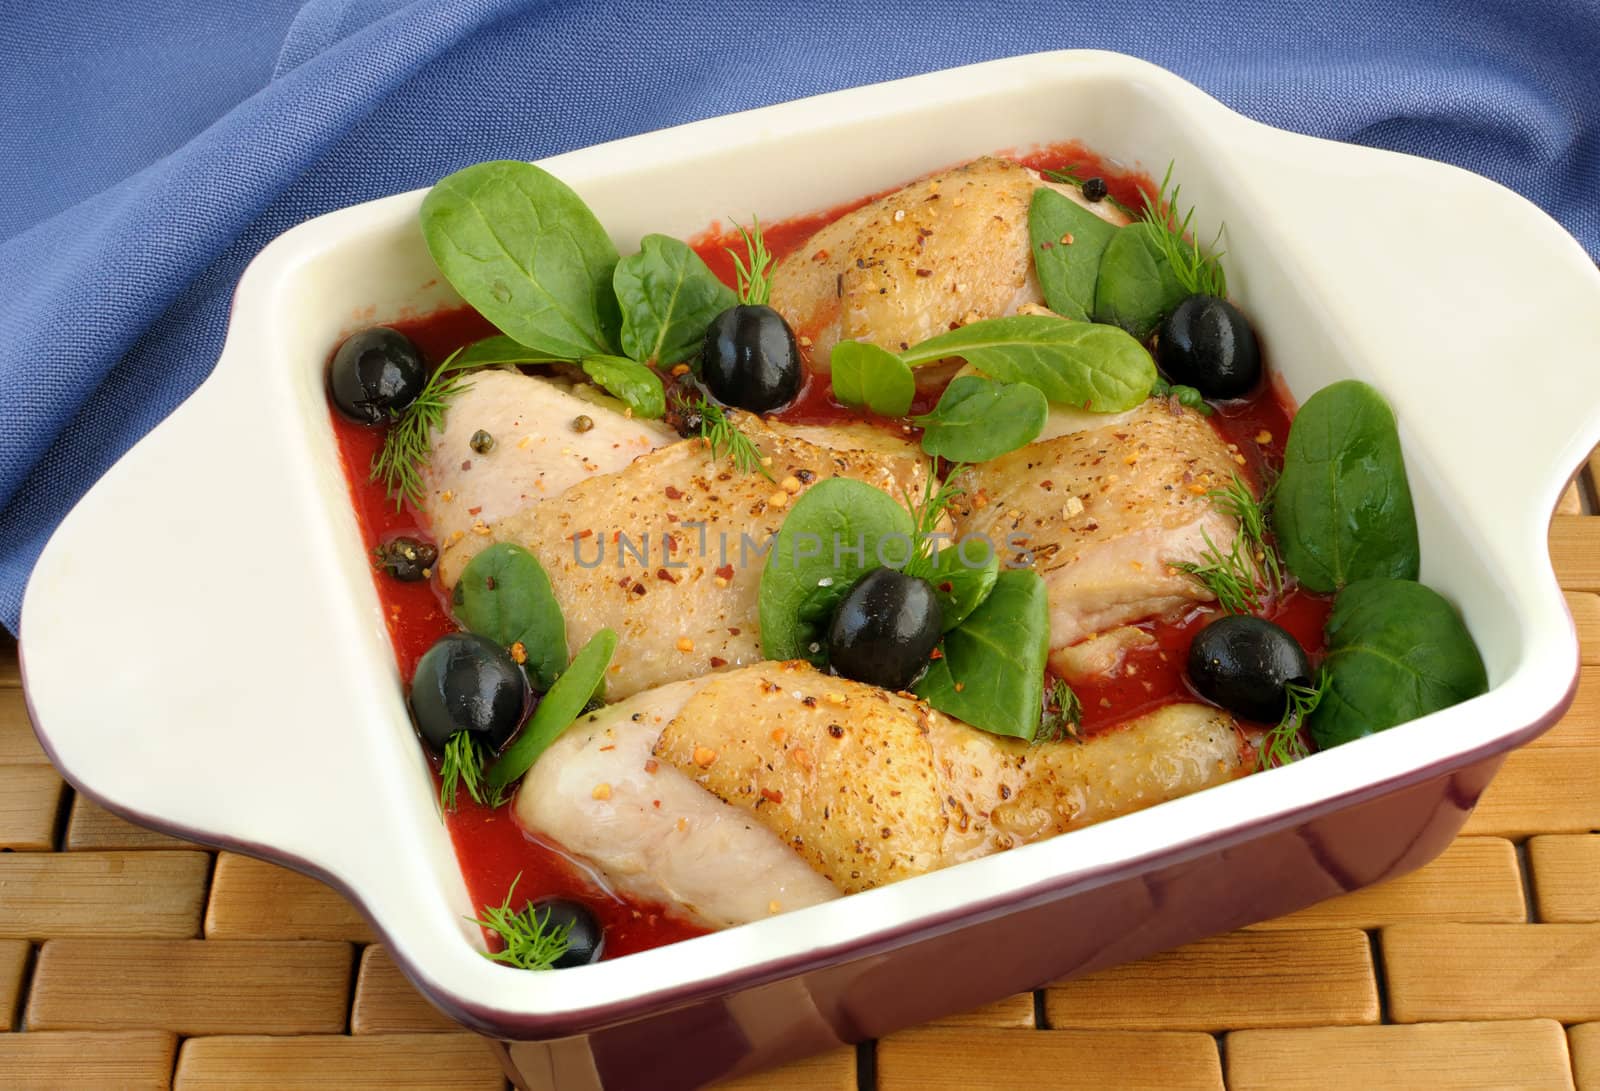 Pieces of chicken in tomato sauce with olives, spinach and spices